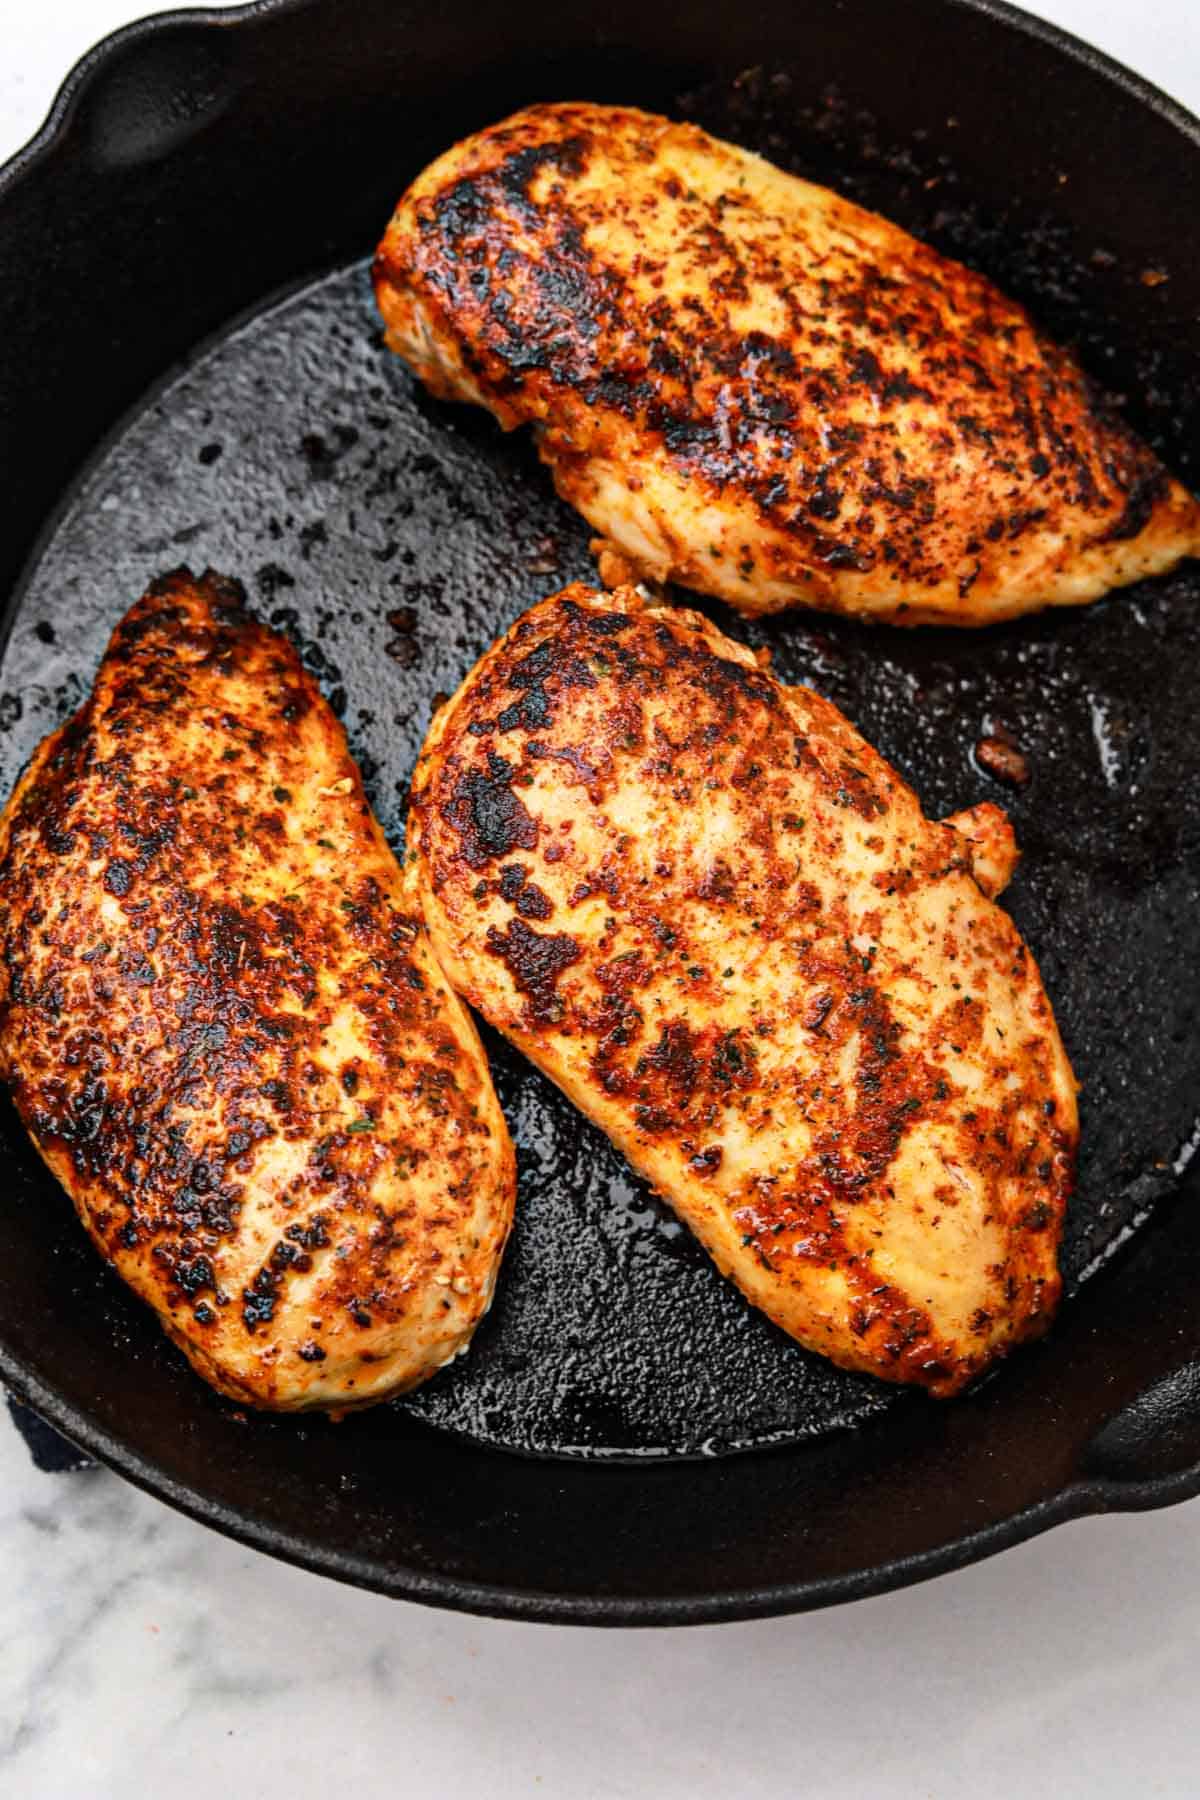 pan seared in a cast iron skillet.